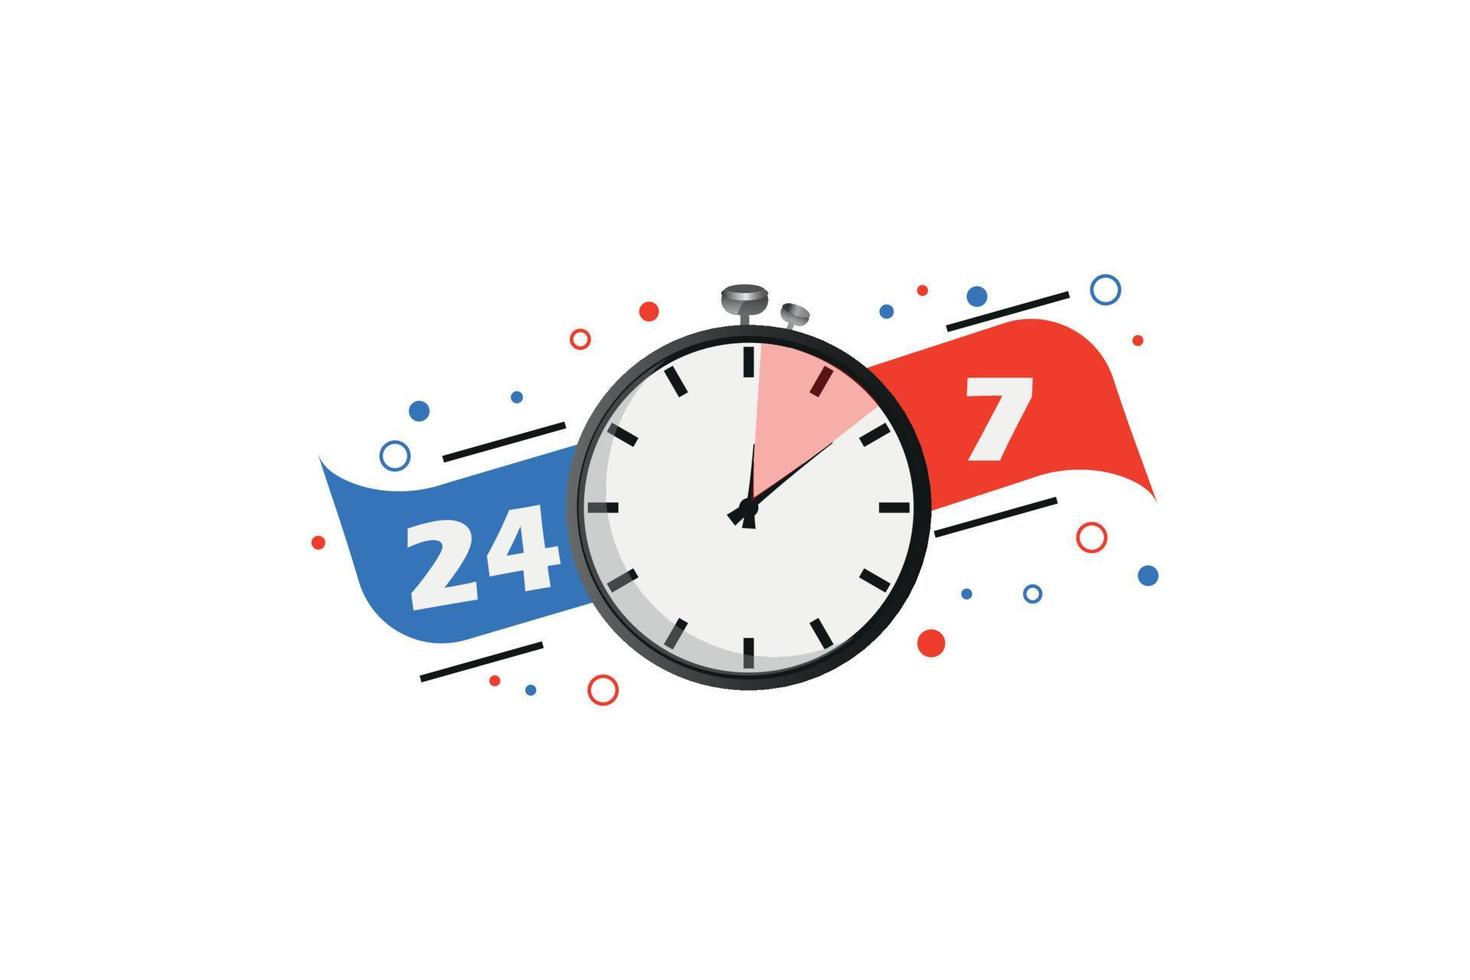 24 7 hours service everyday design with clock vector